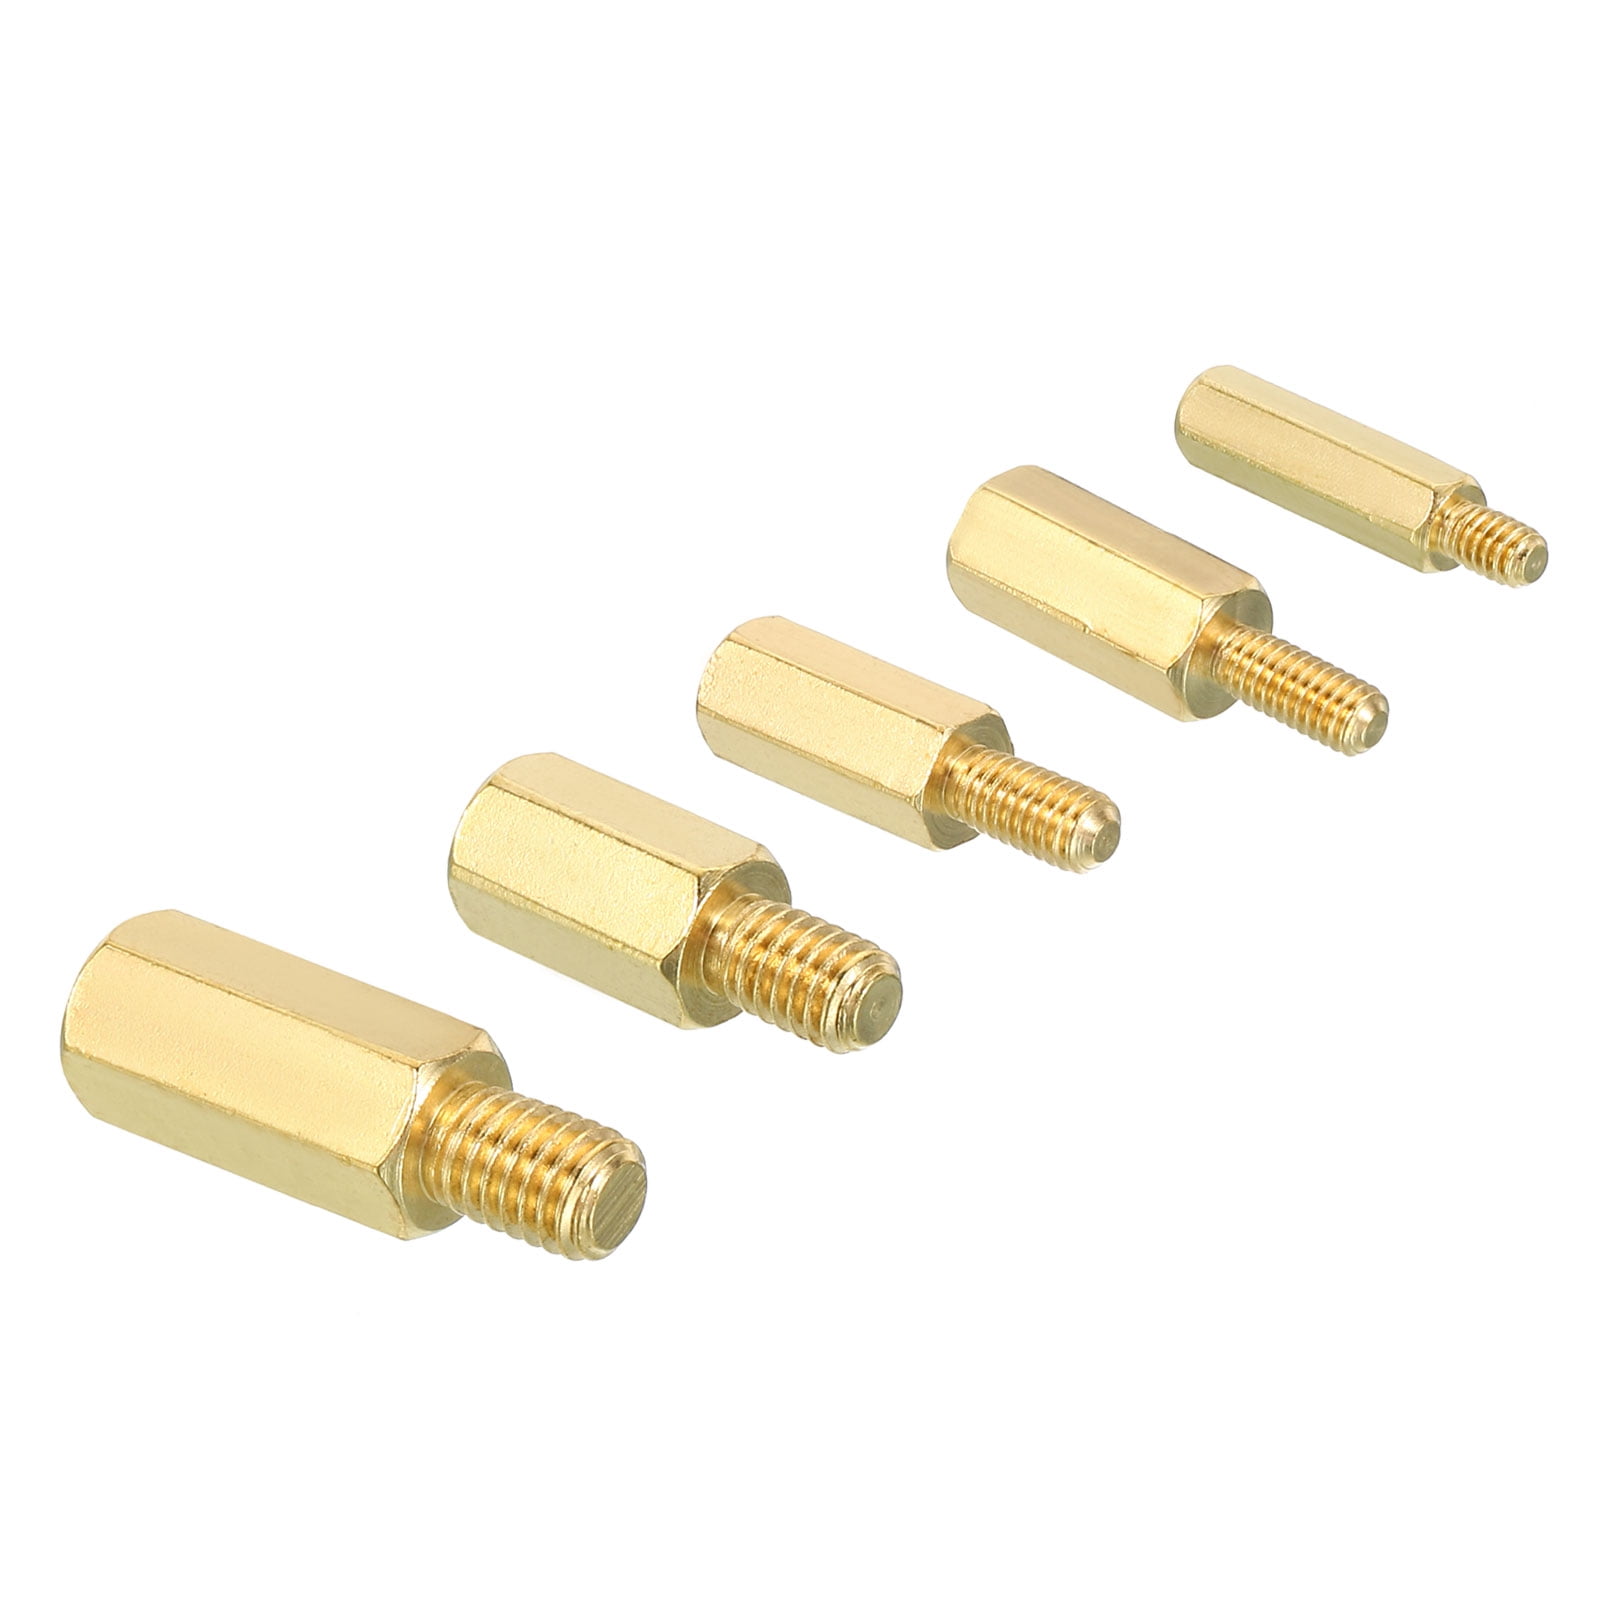 Brass M2.5 Standoffs for Pi HATs - Black Plated - Pack of 2 : ID